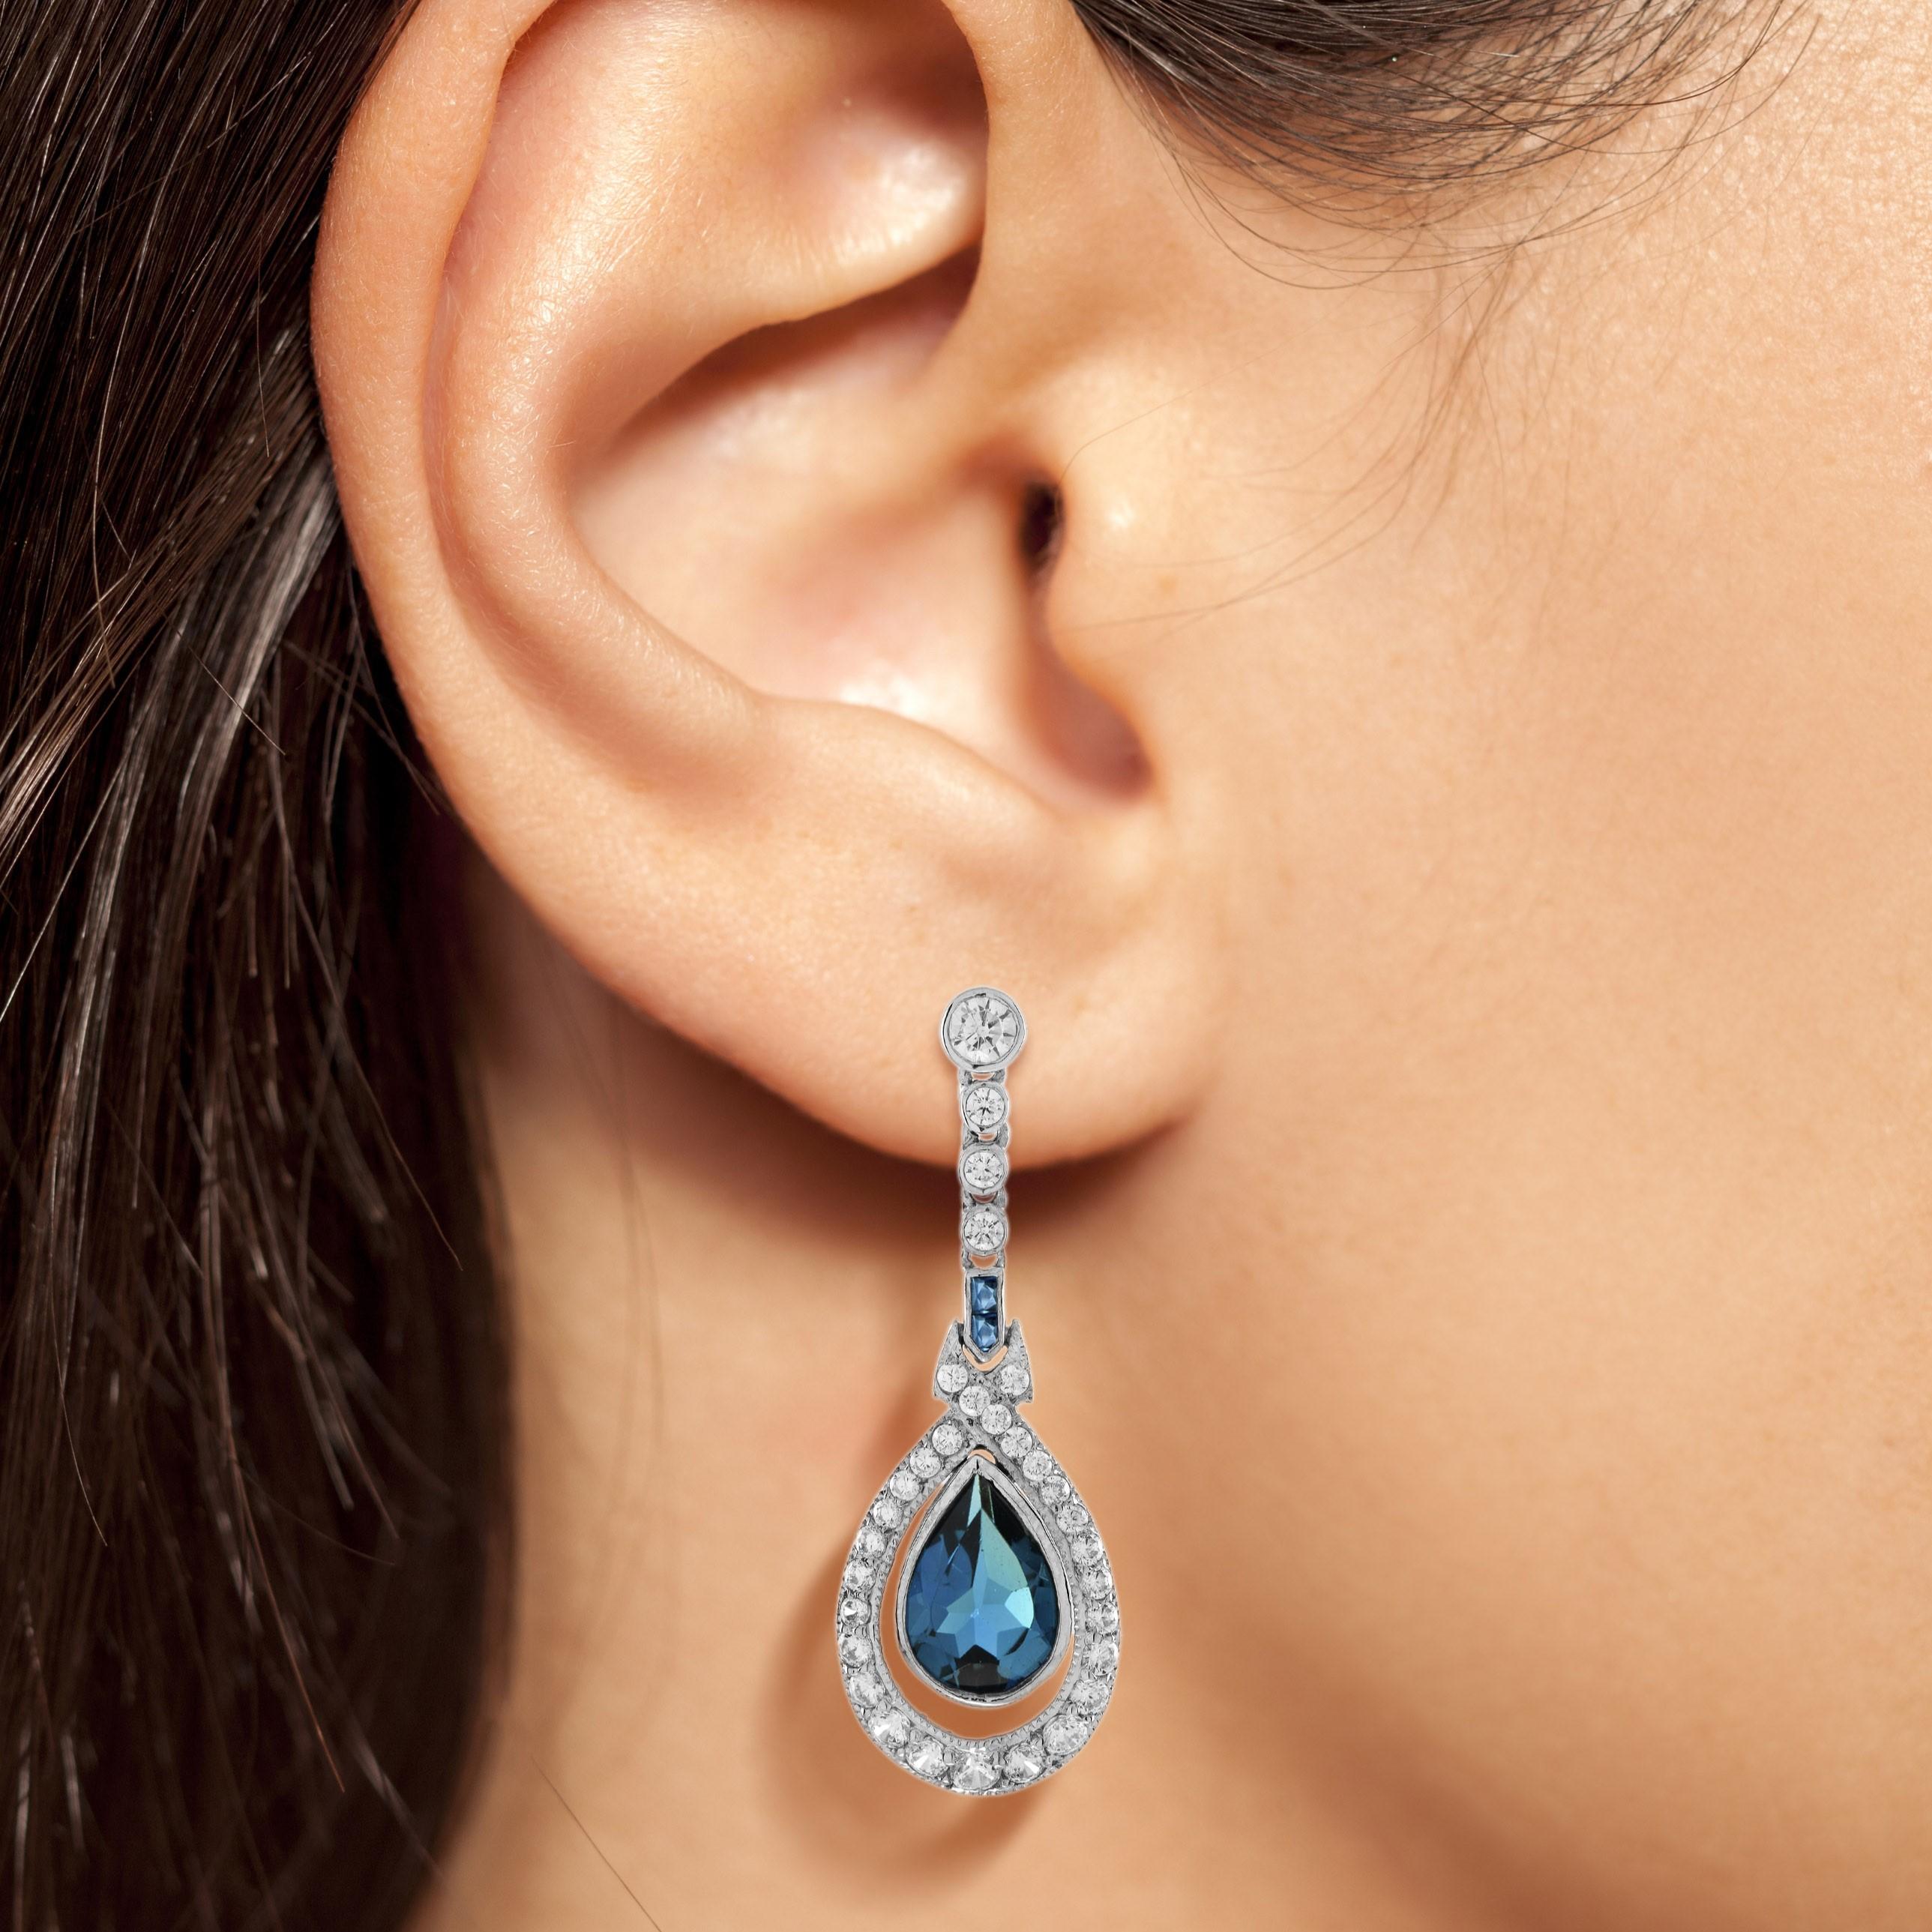 These gorgeous classic antique design earrings are absolutely captivating. The rich, even color of the pear shaped London blue topaz accented by the diamonds would make a wonderful gift for a December or November birthday, just anyone that simply